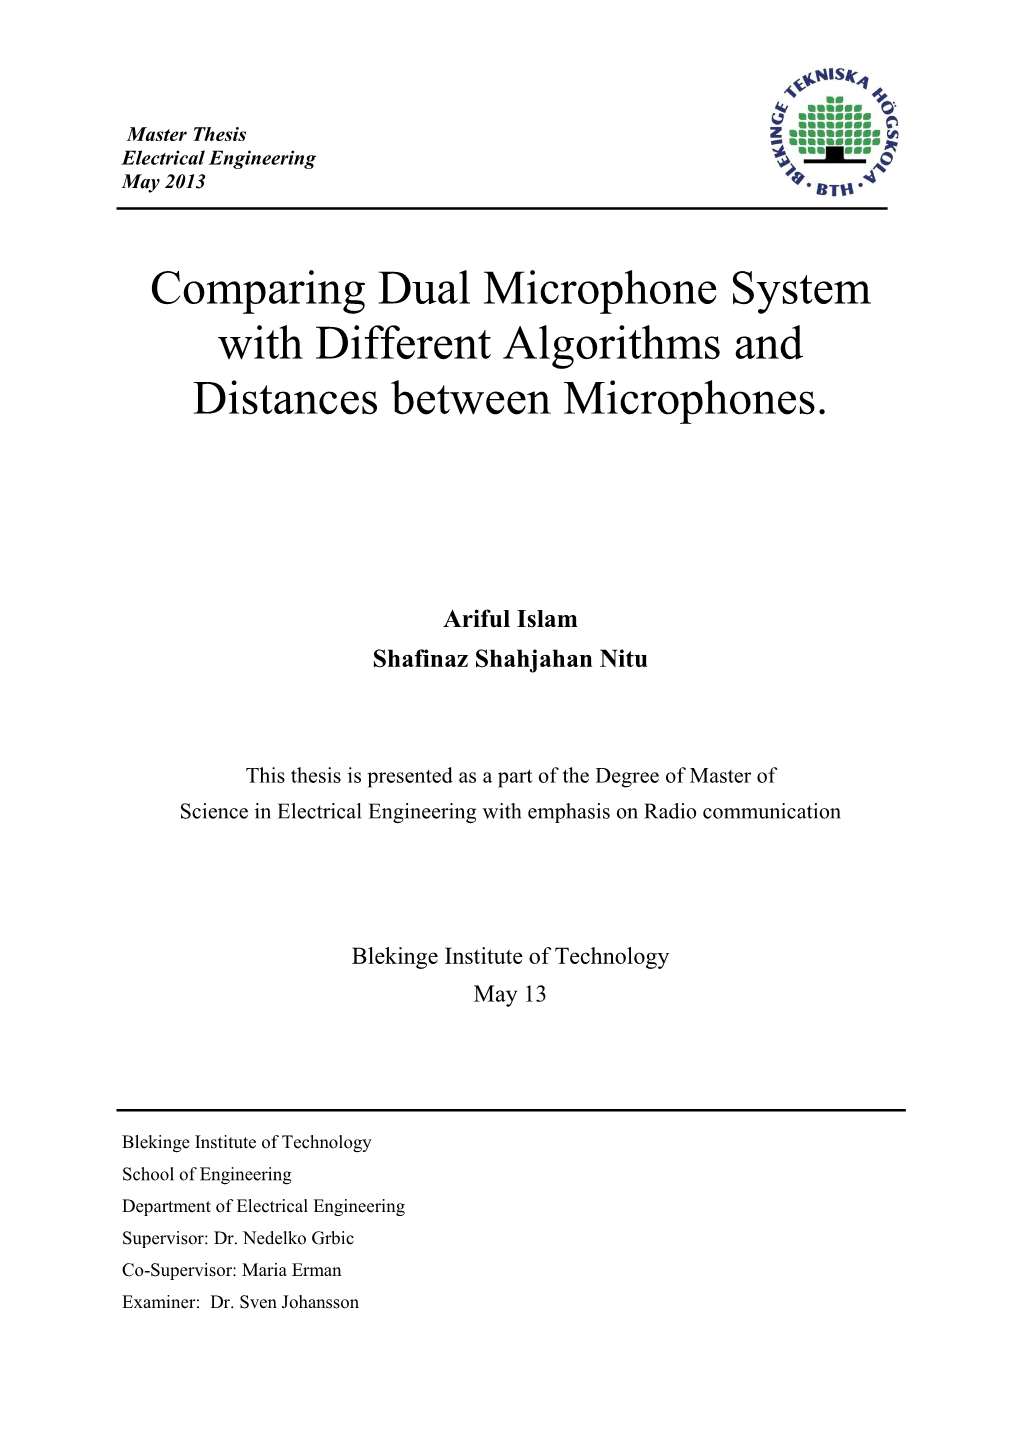 Comparing Dual Microphone System with Different Algorithms and Distances Between Microphones